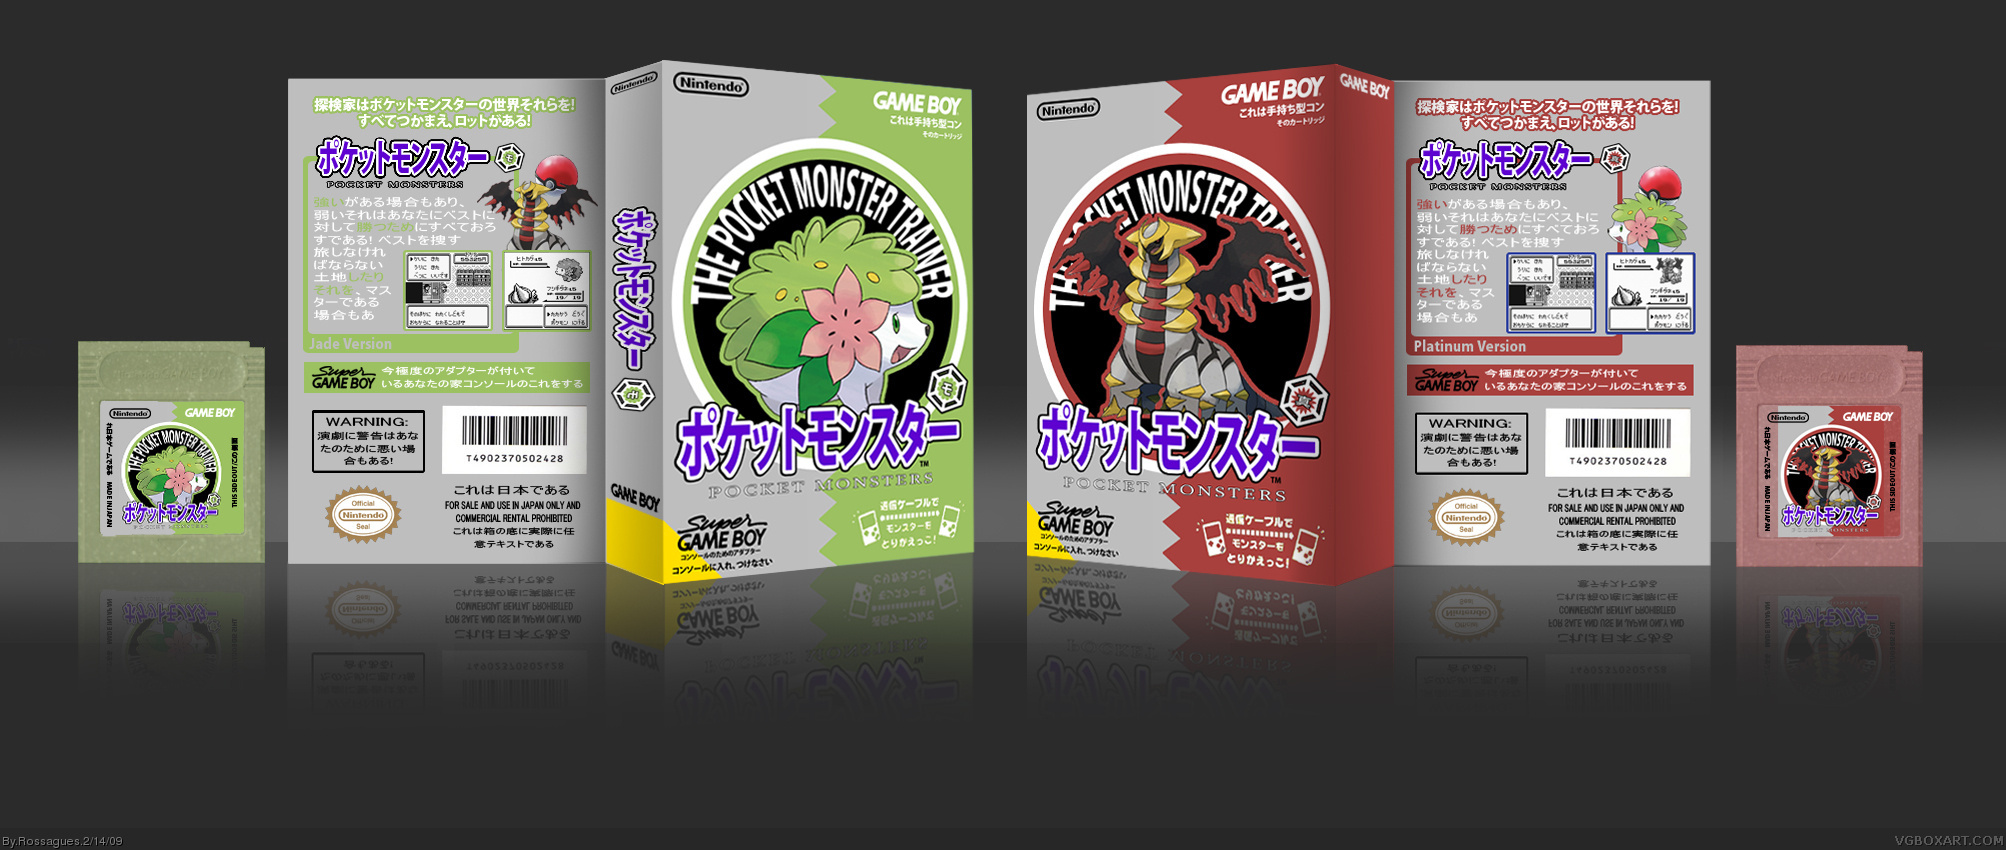 Pocket Monsters Platinum and Jade box cover